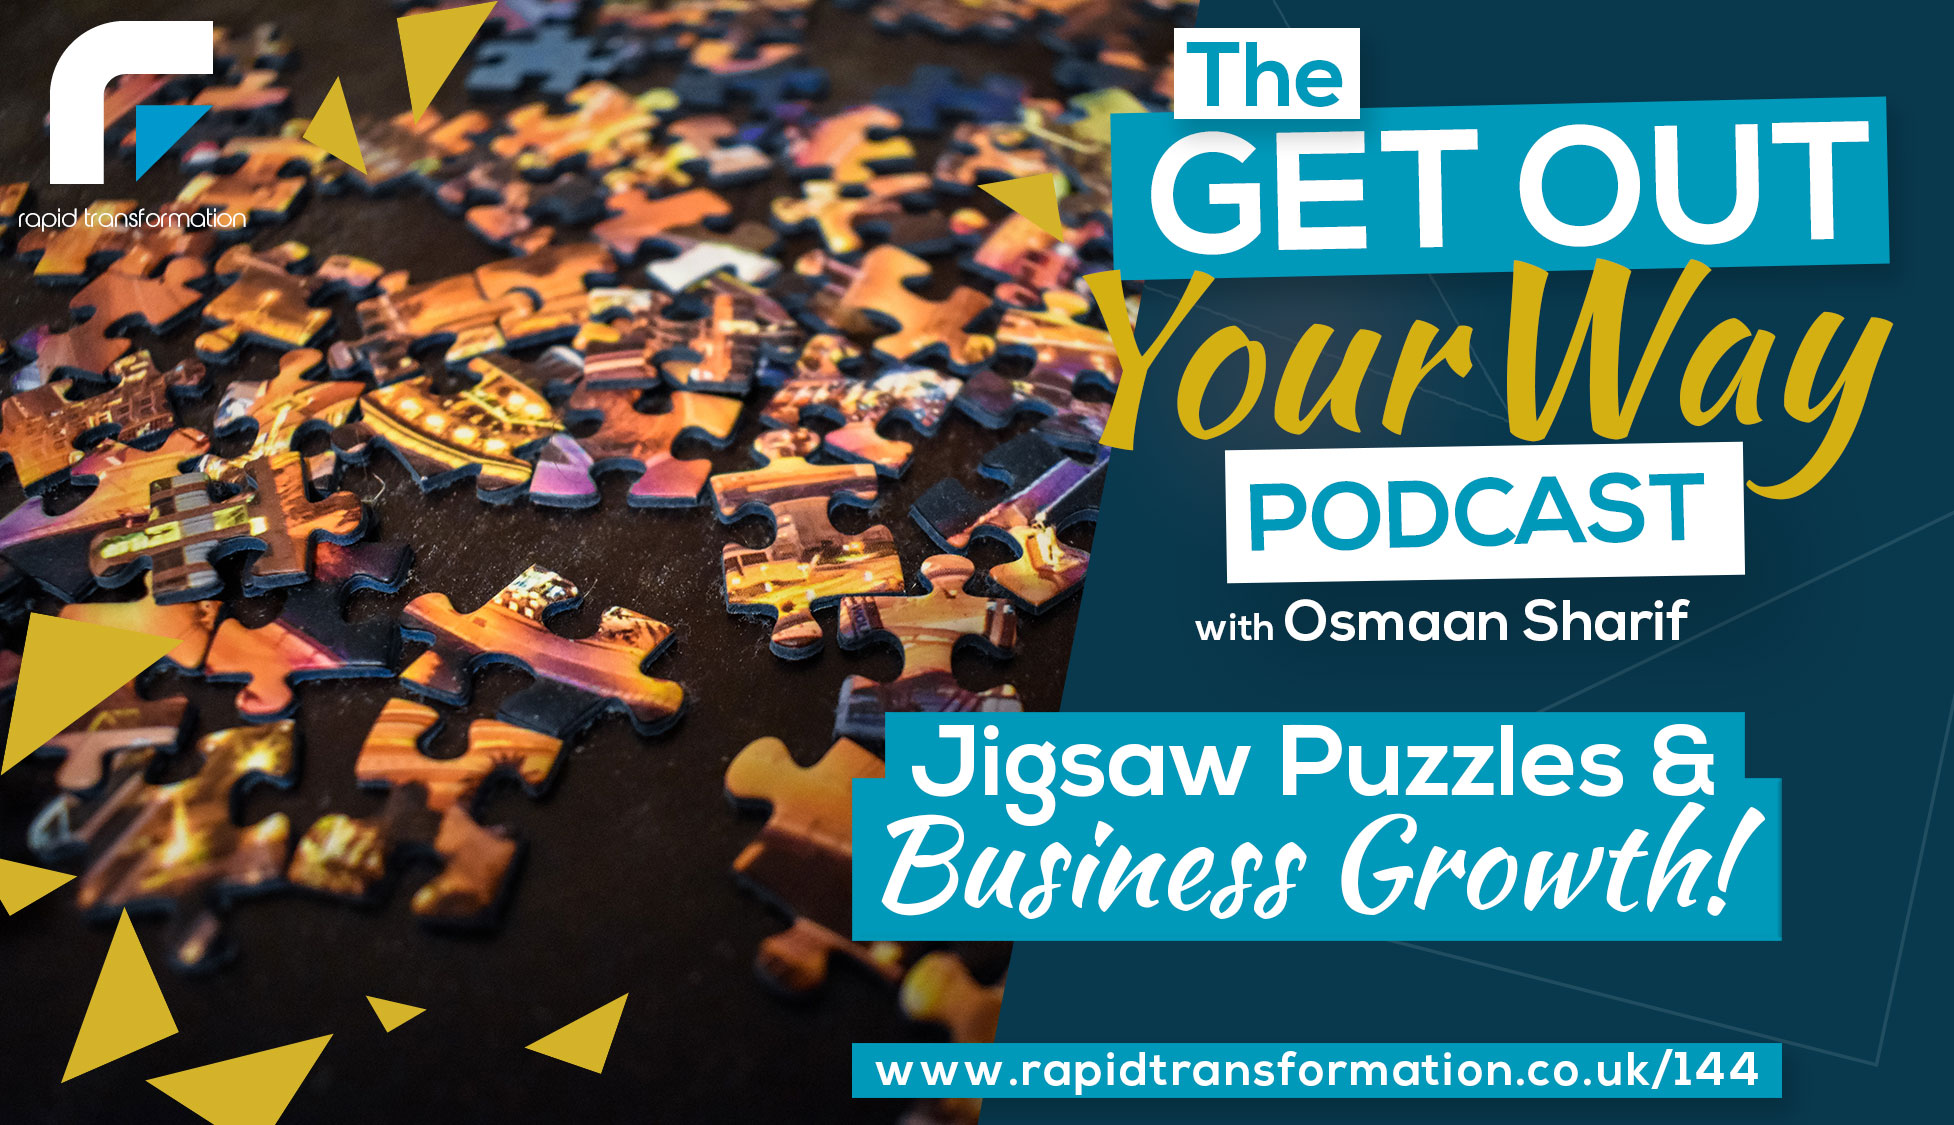 Jigsaw Puzzles & Business Growth